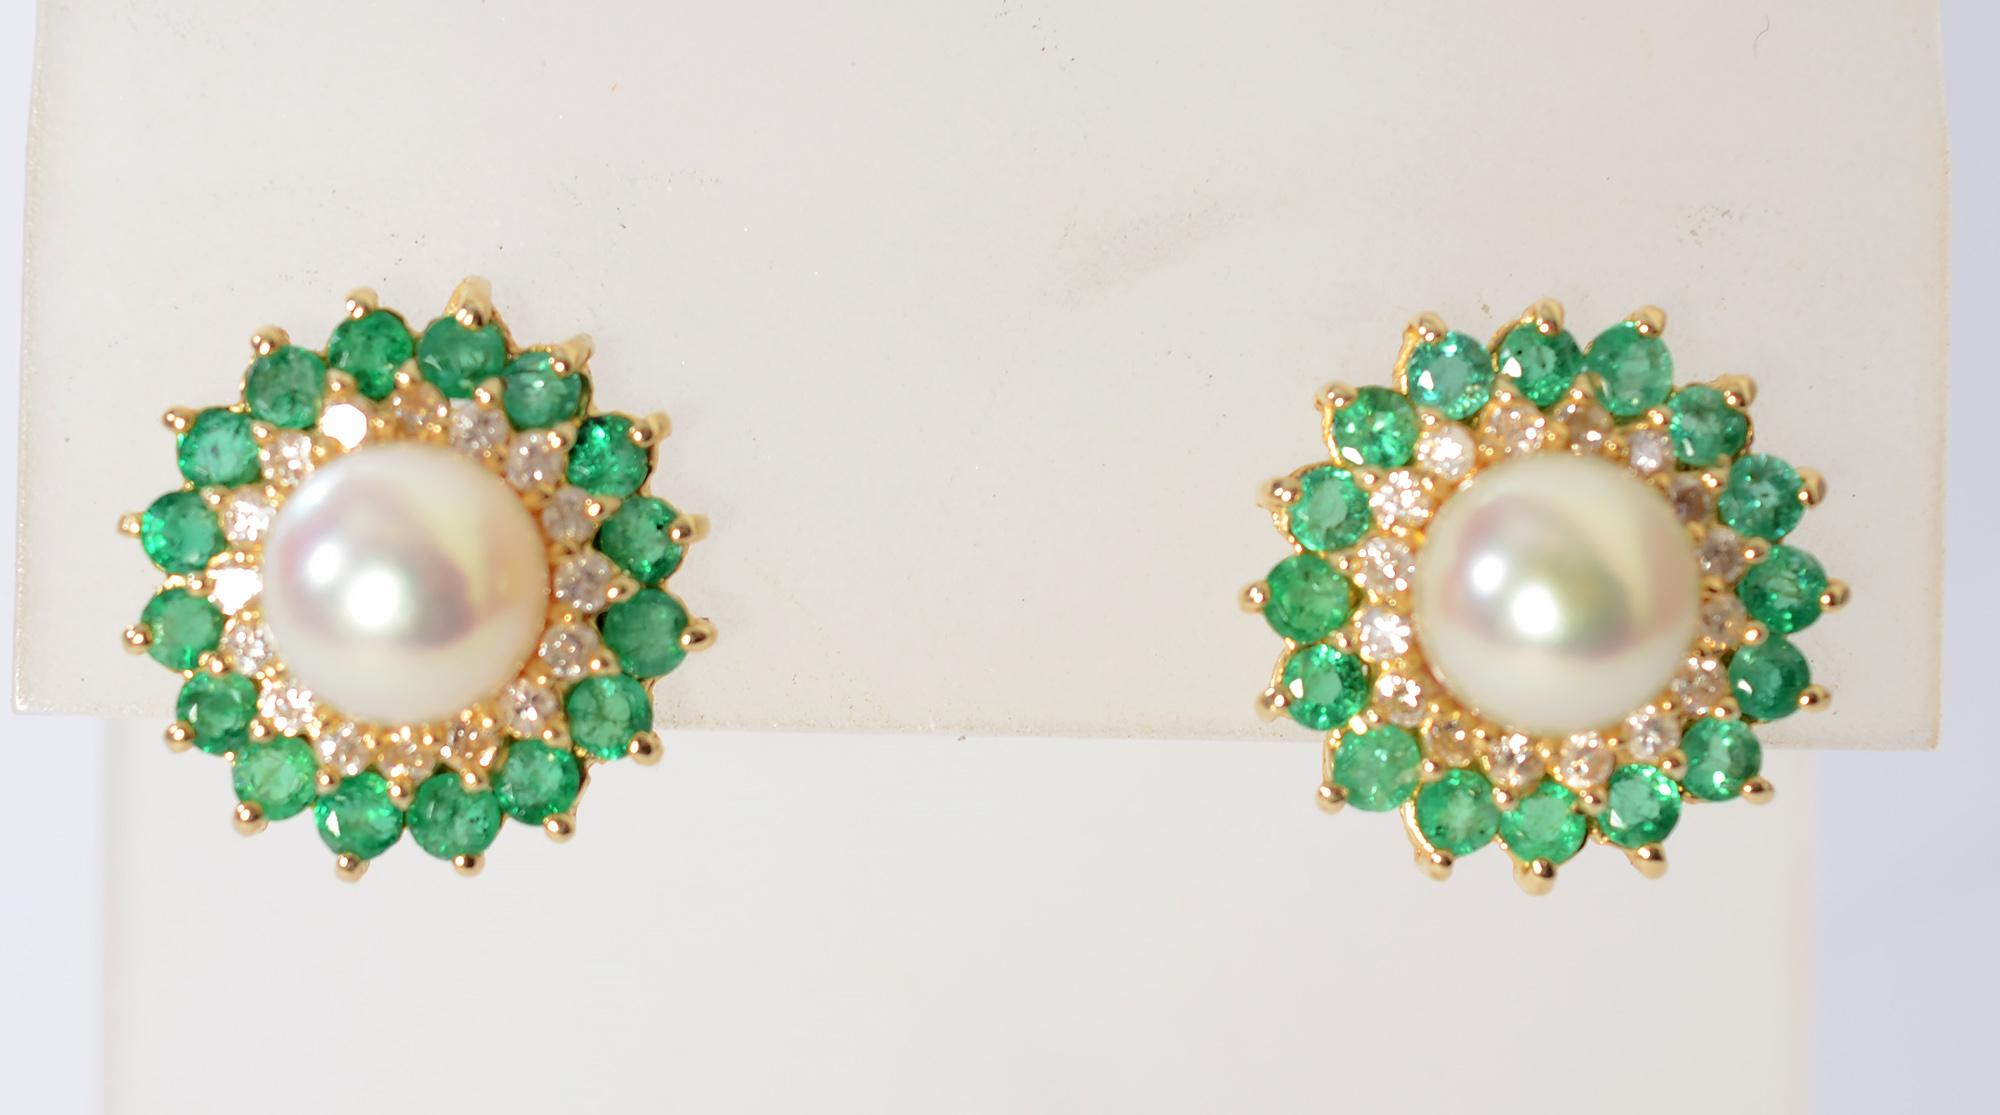 Delicate but with impact pearl earrings surrounded by round cut diamonds and emeralds. The earrings were probably made in the 1960's but the design is timeless. The central pearls are 7.25 mm. The total diamond weight is approximately .4 carats and